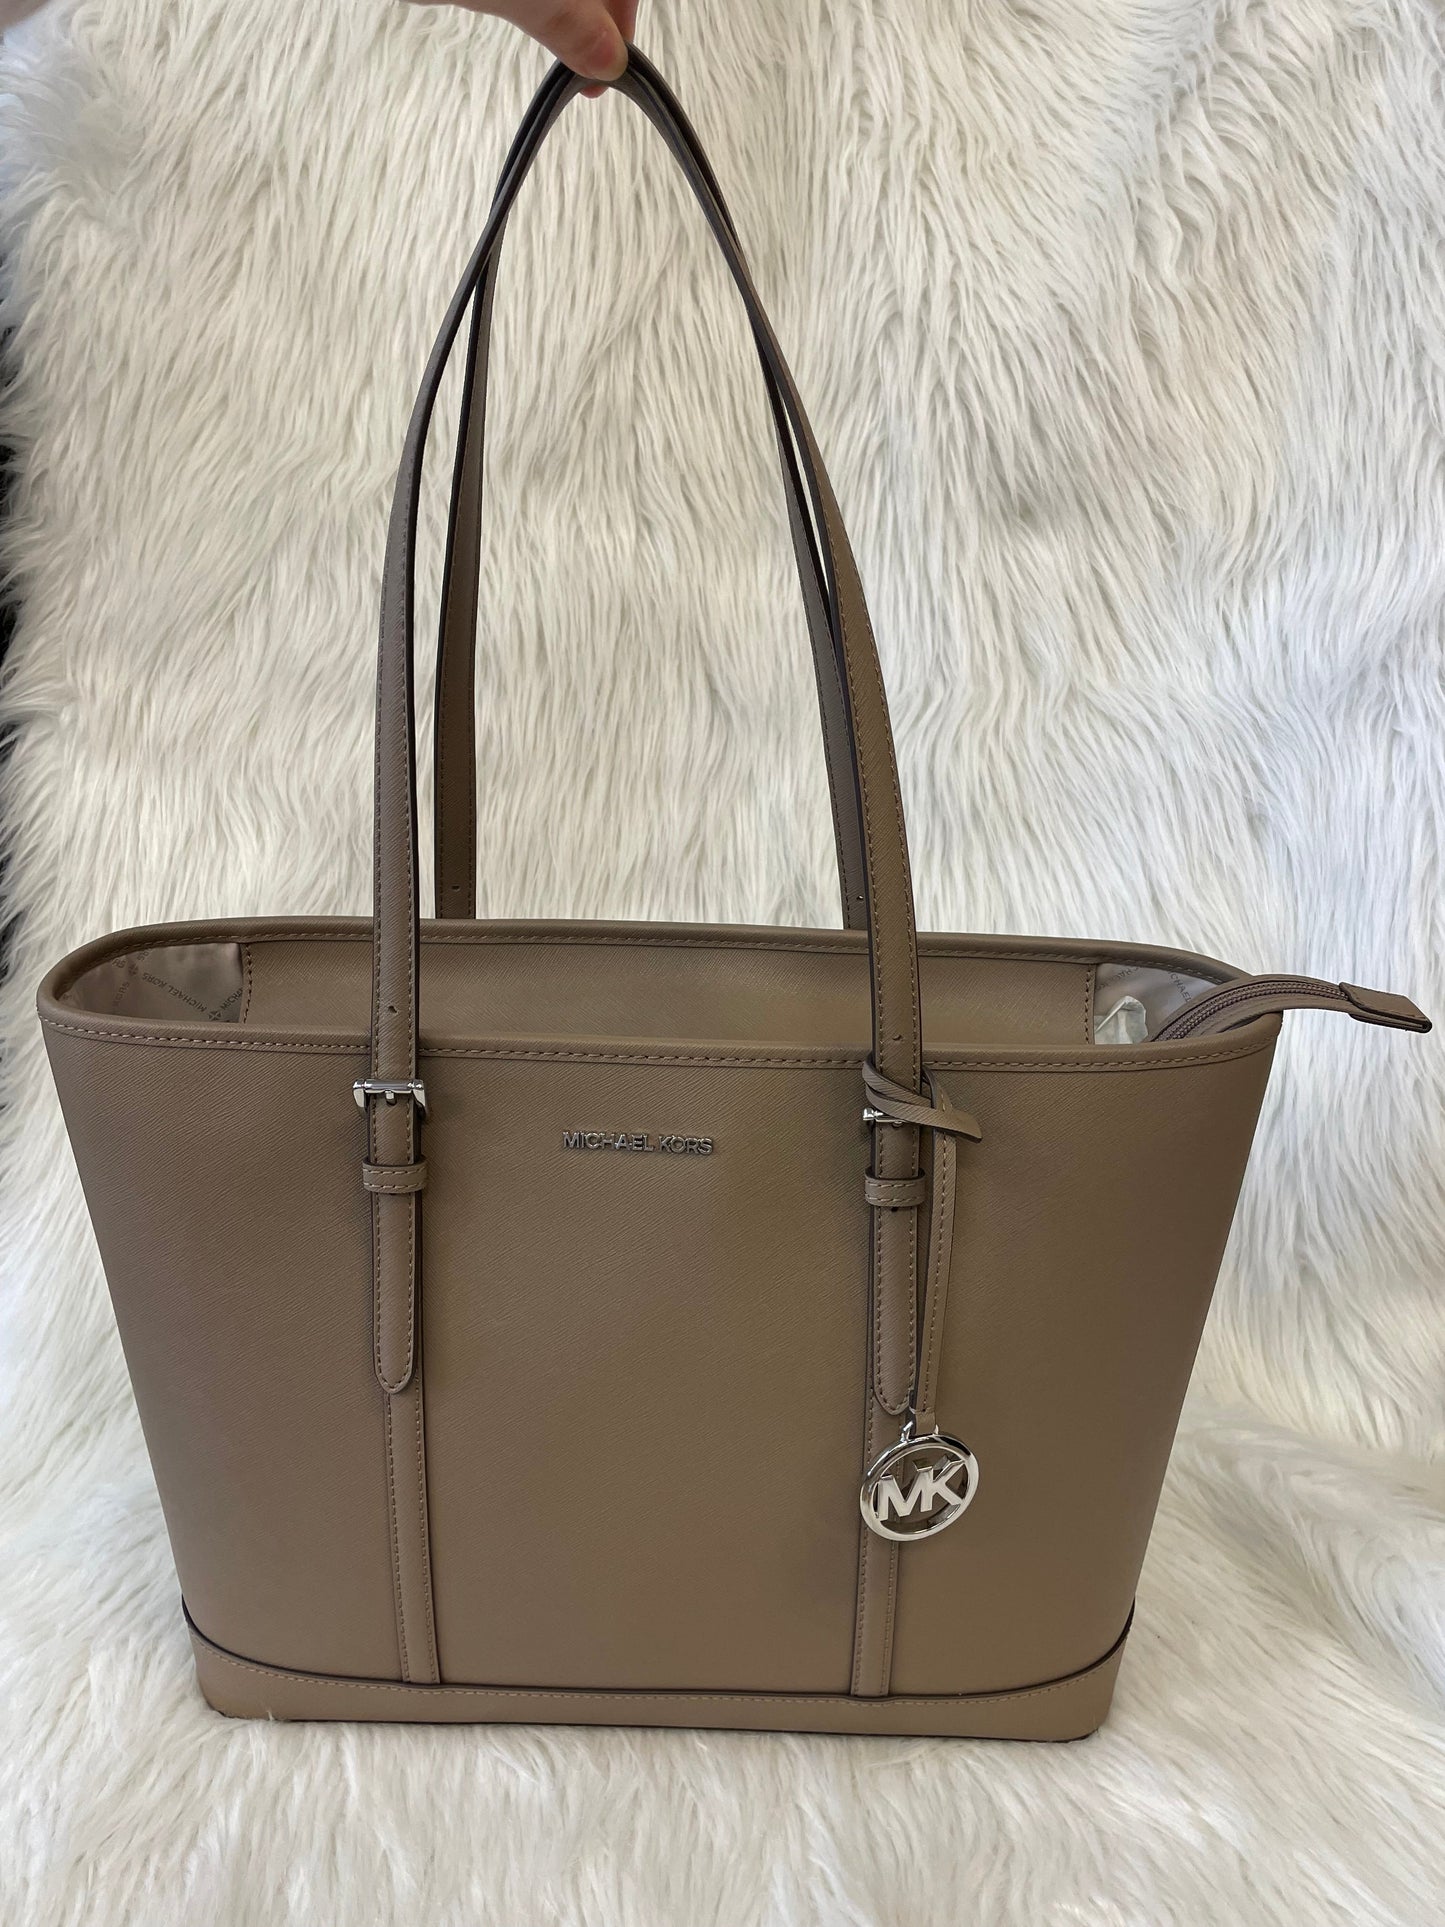 Tote Designer Michael By Michael Kors, Size Large